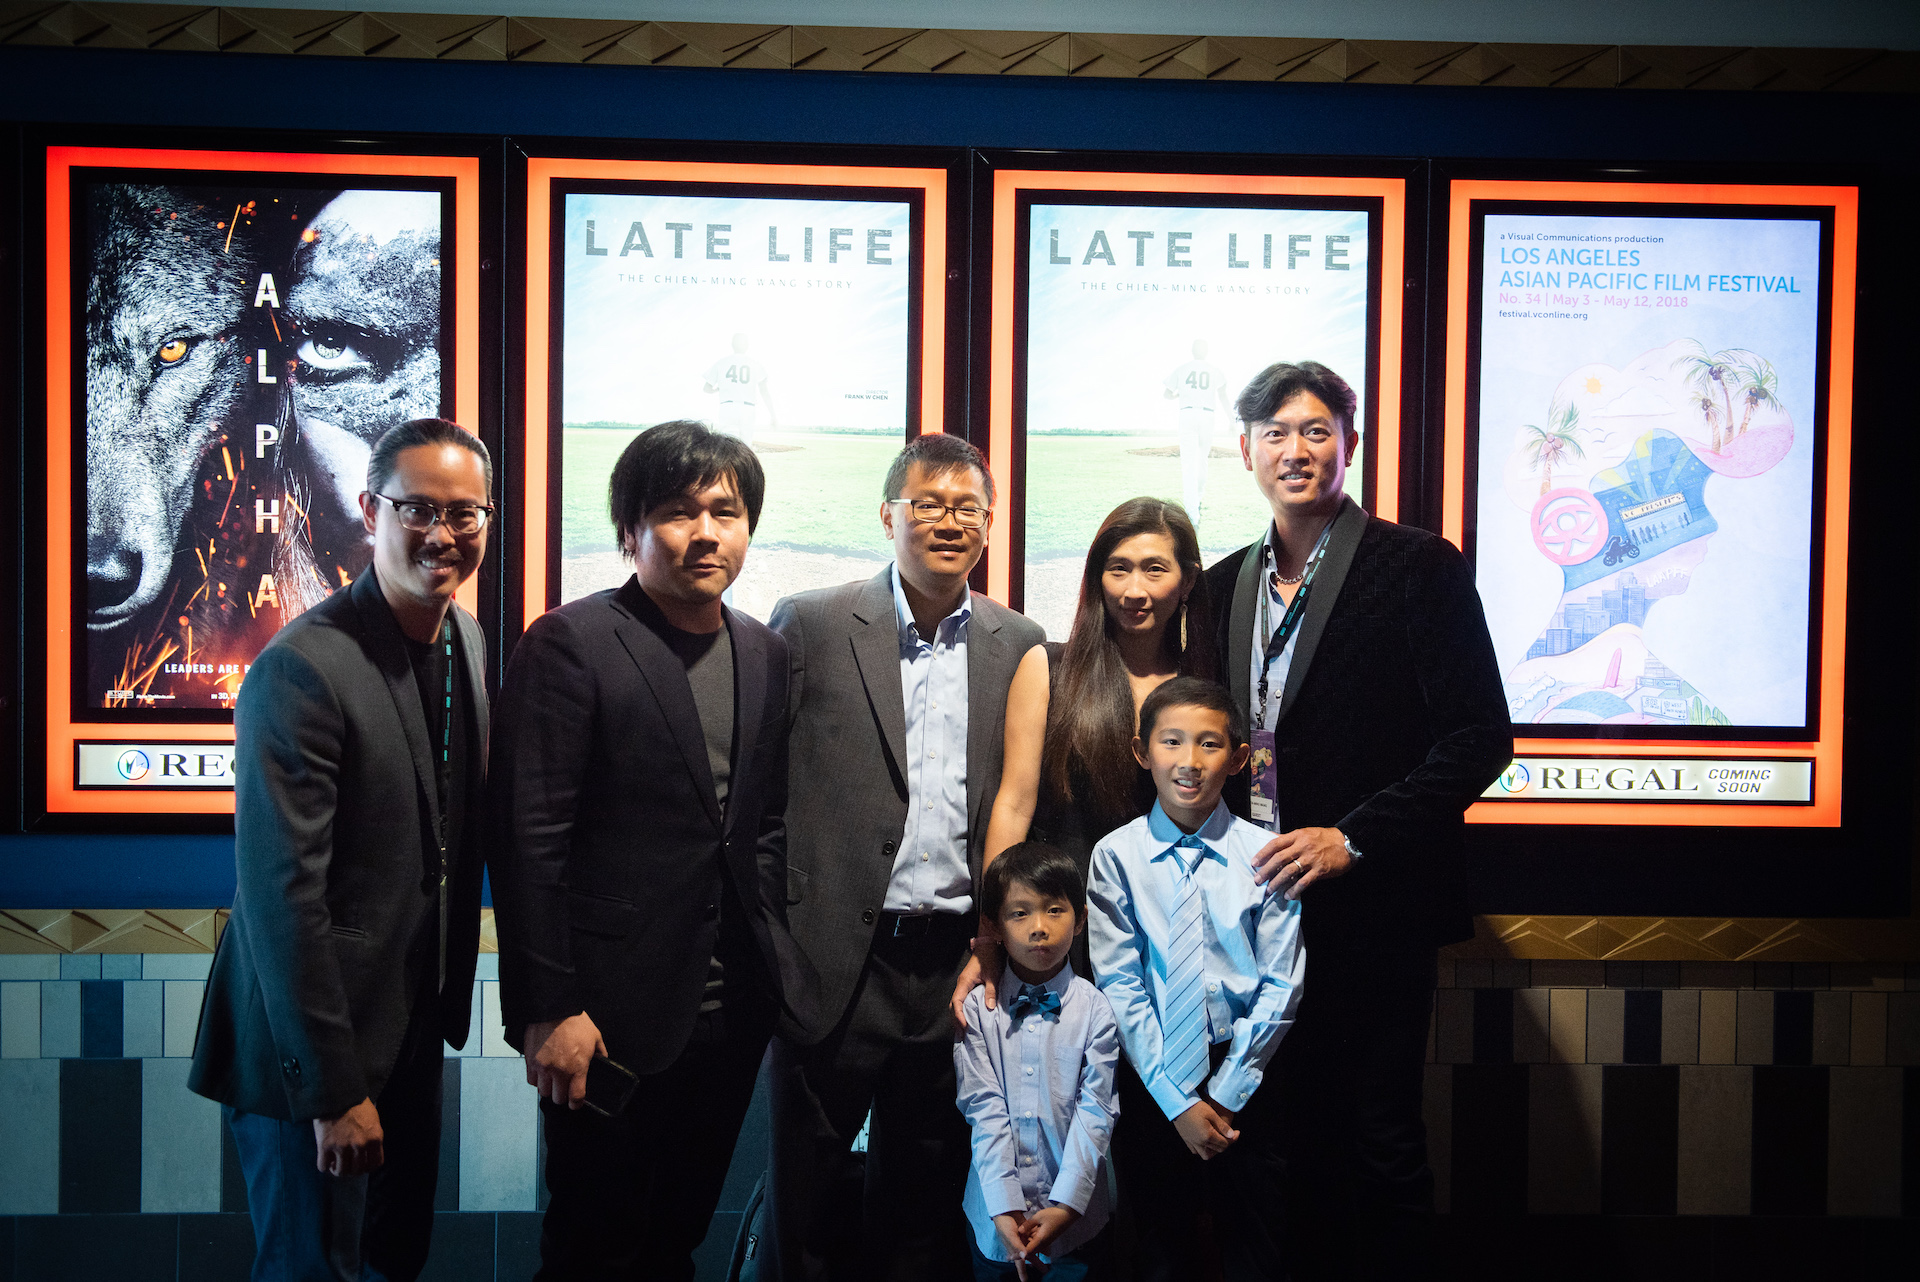 Late Life: The Chien Ming Wang Story